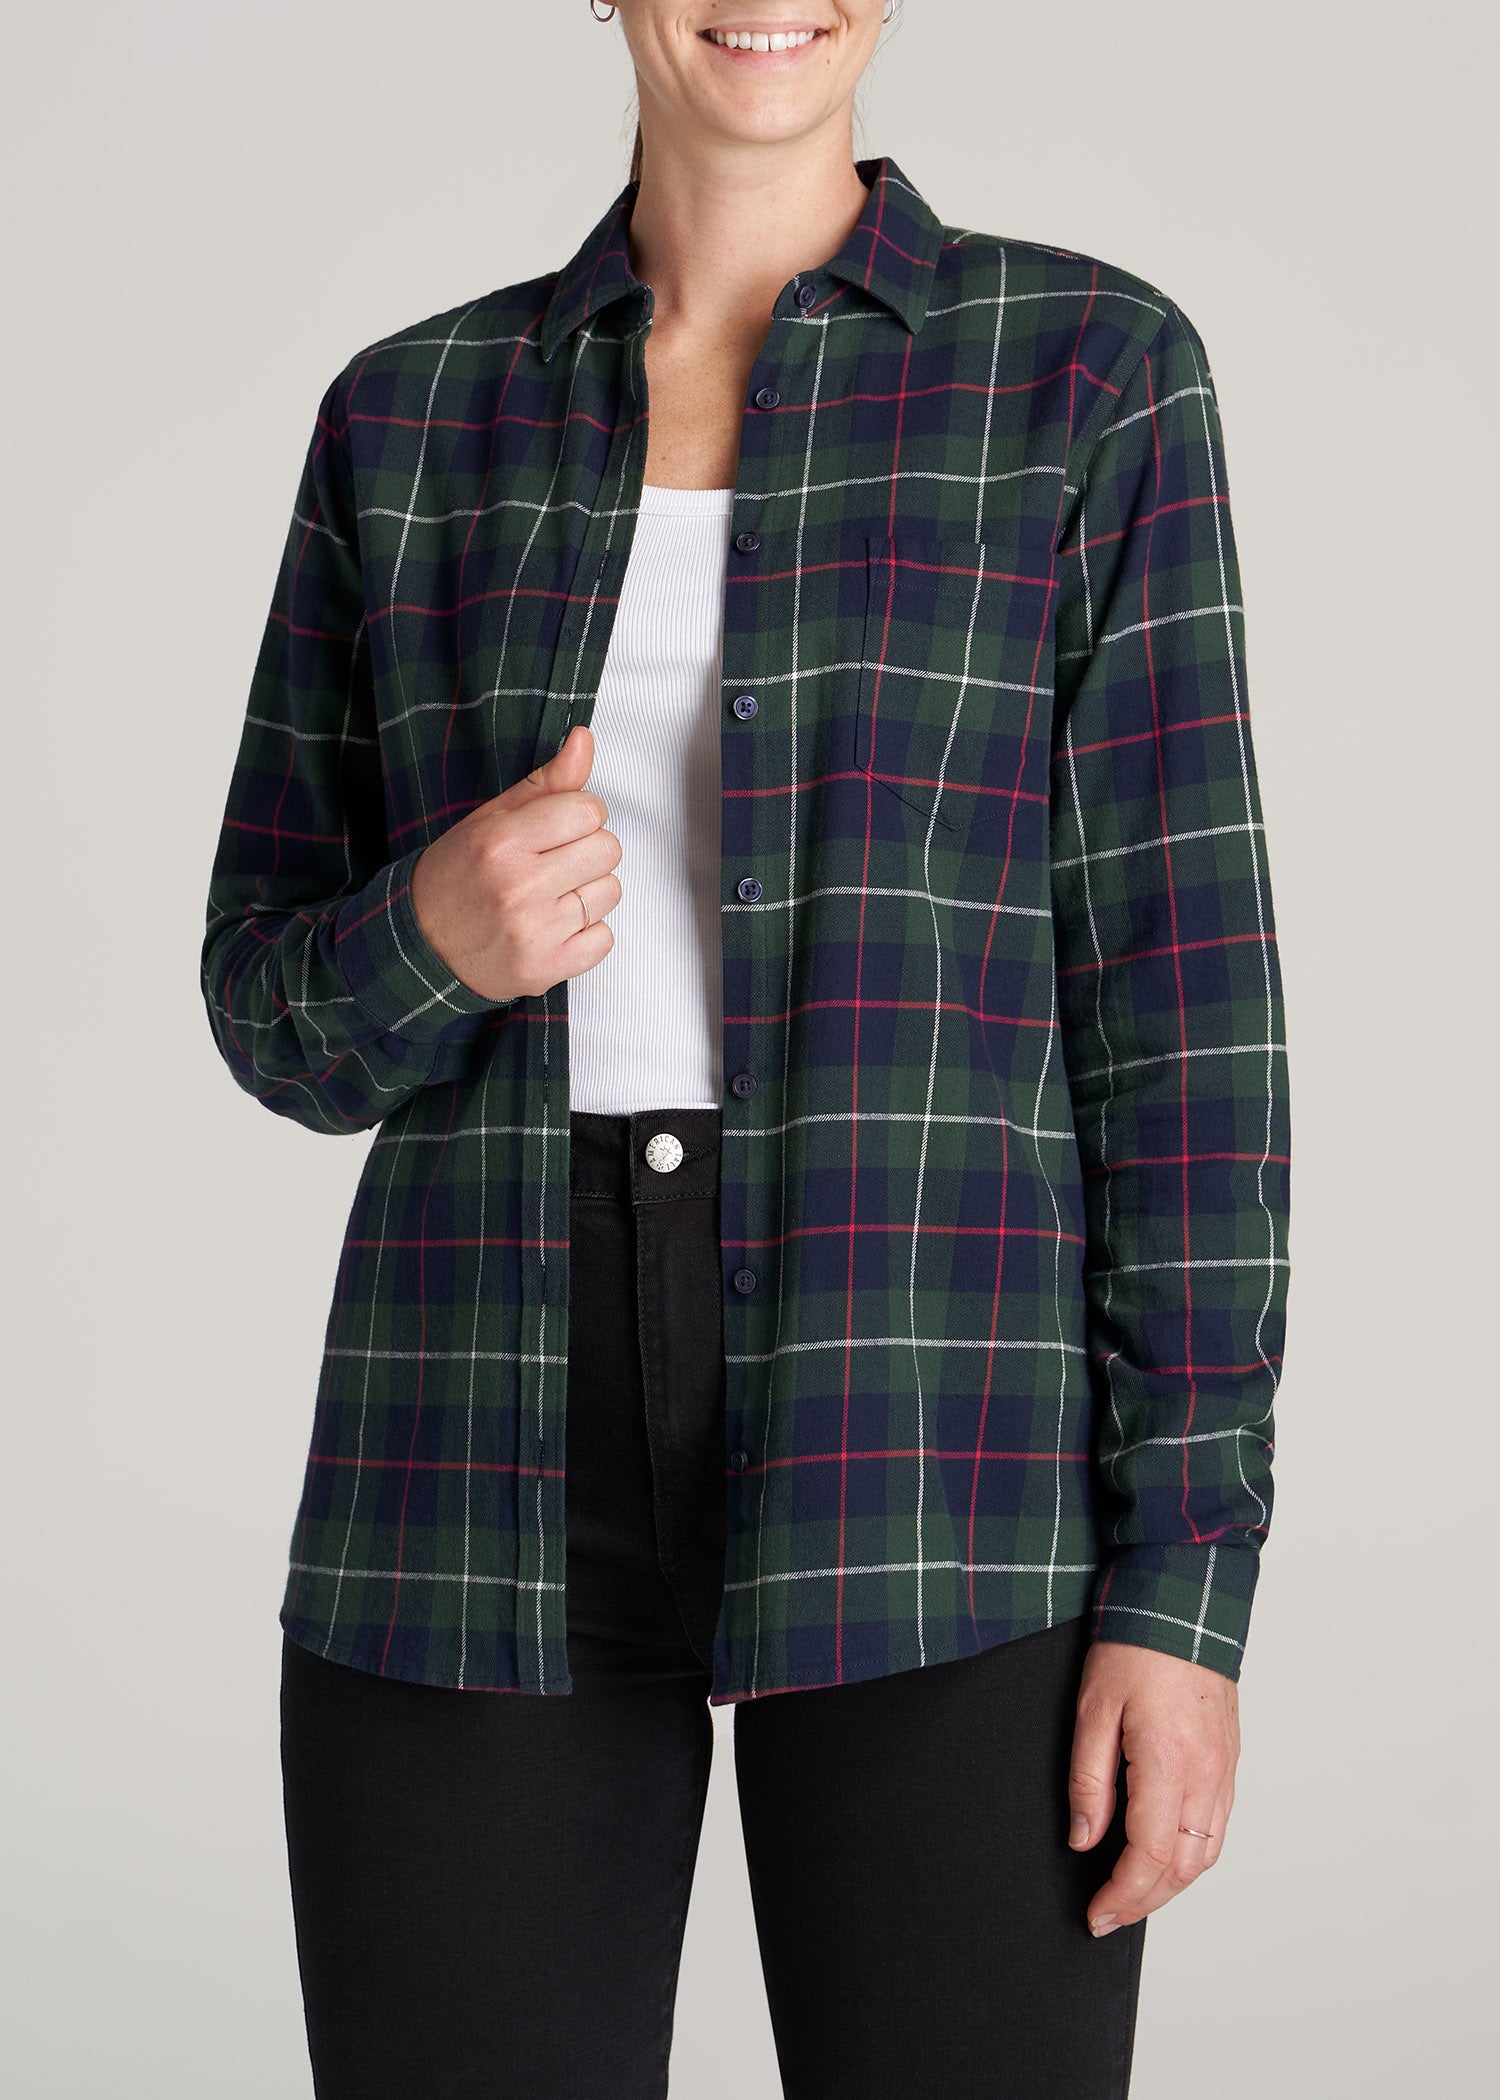 Flannel Button-Up Shirt for Tall Women in Green & Blue Plaid